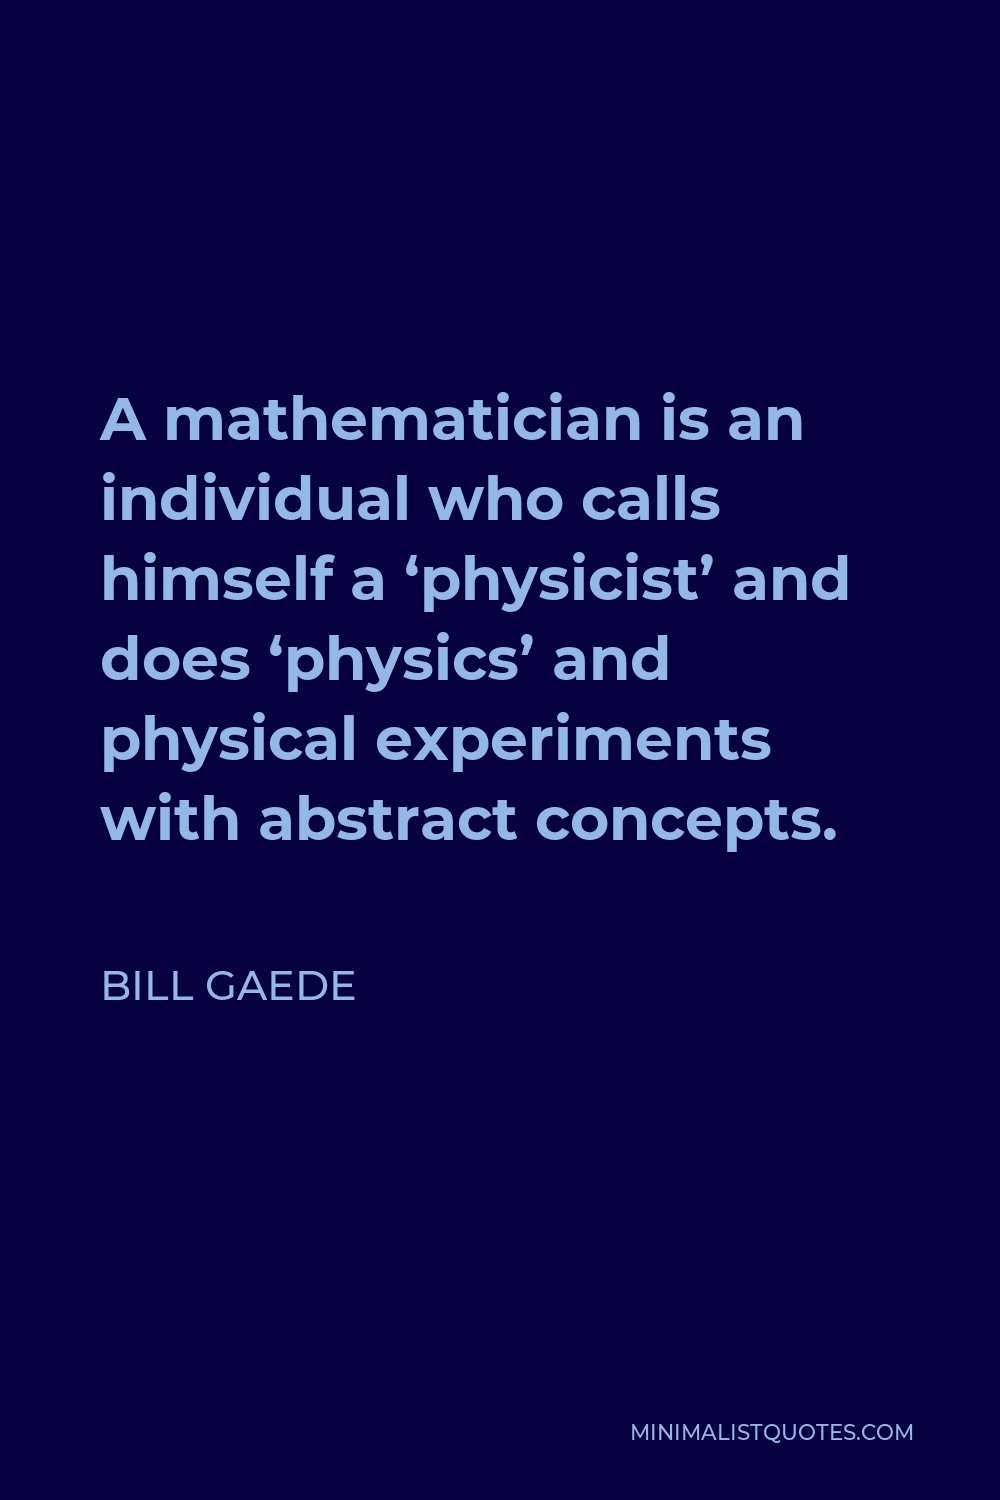 Bill Gaede Quote - A mathematician is an individual who calls himself a ‘physicist’ and does ‘physics’ and physical experiments with abstract concepts.